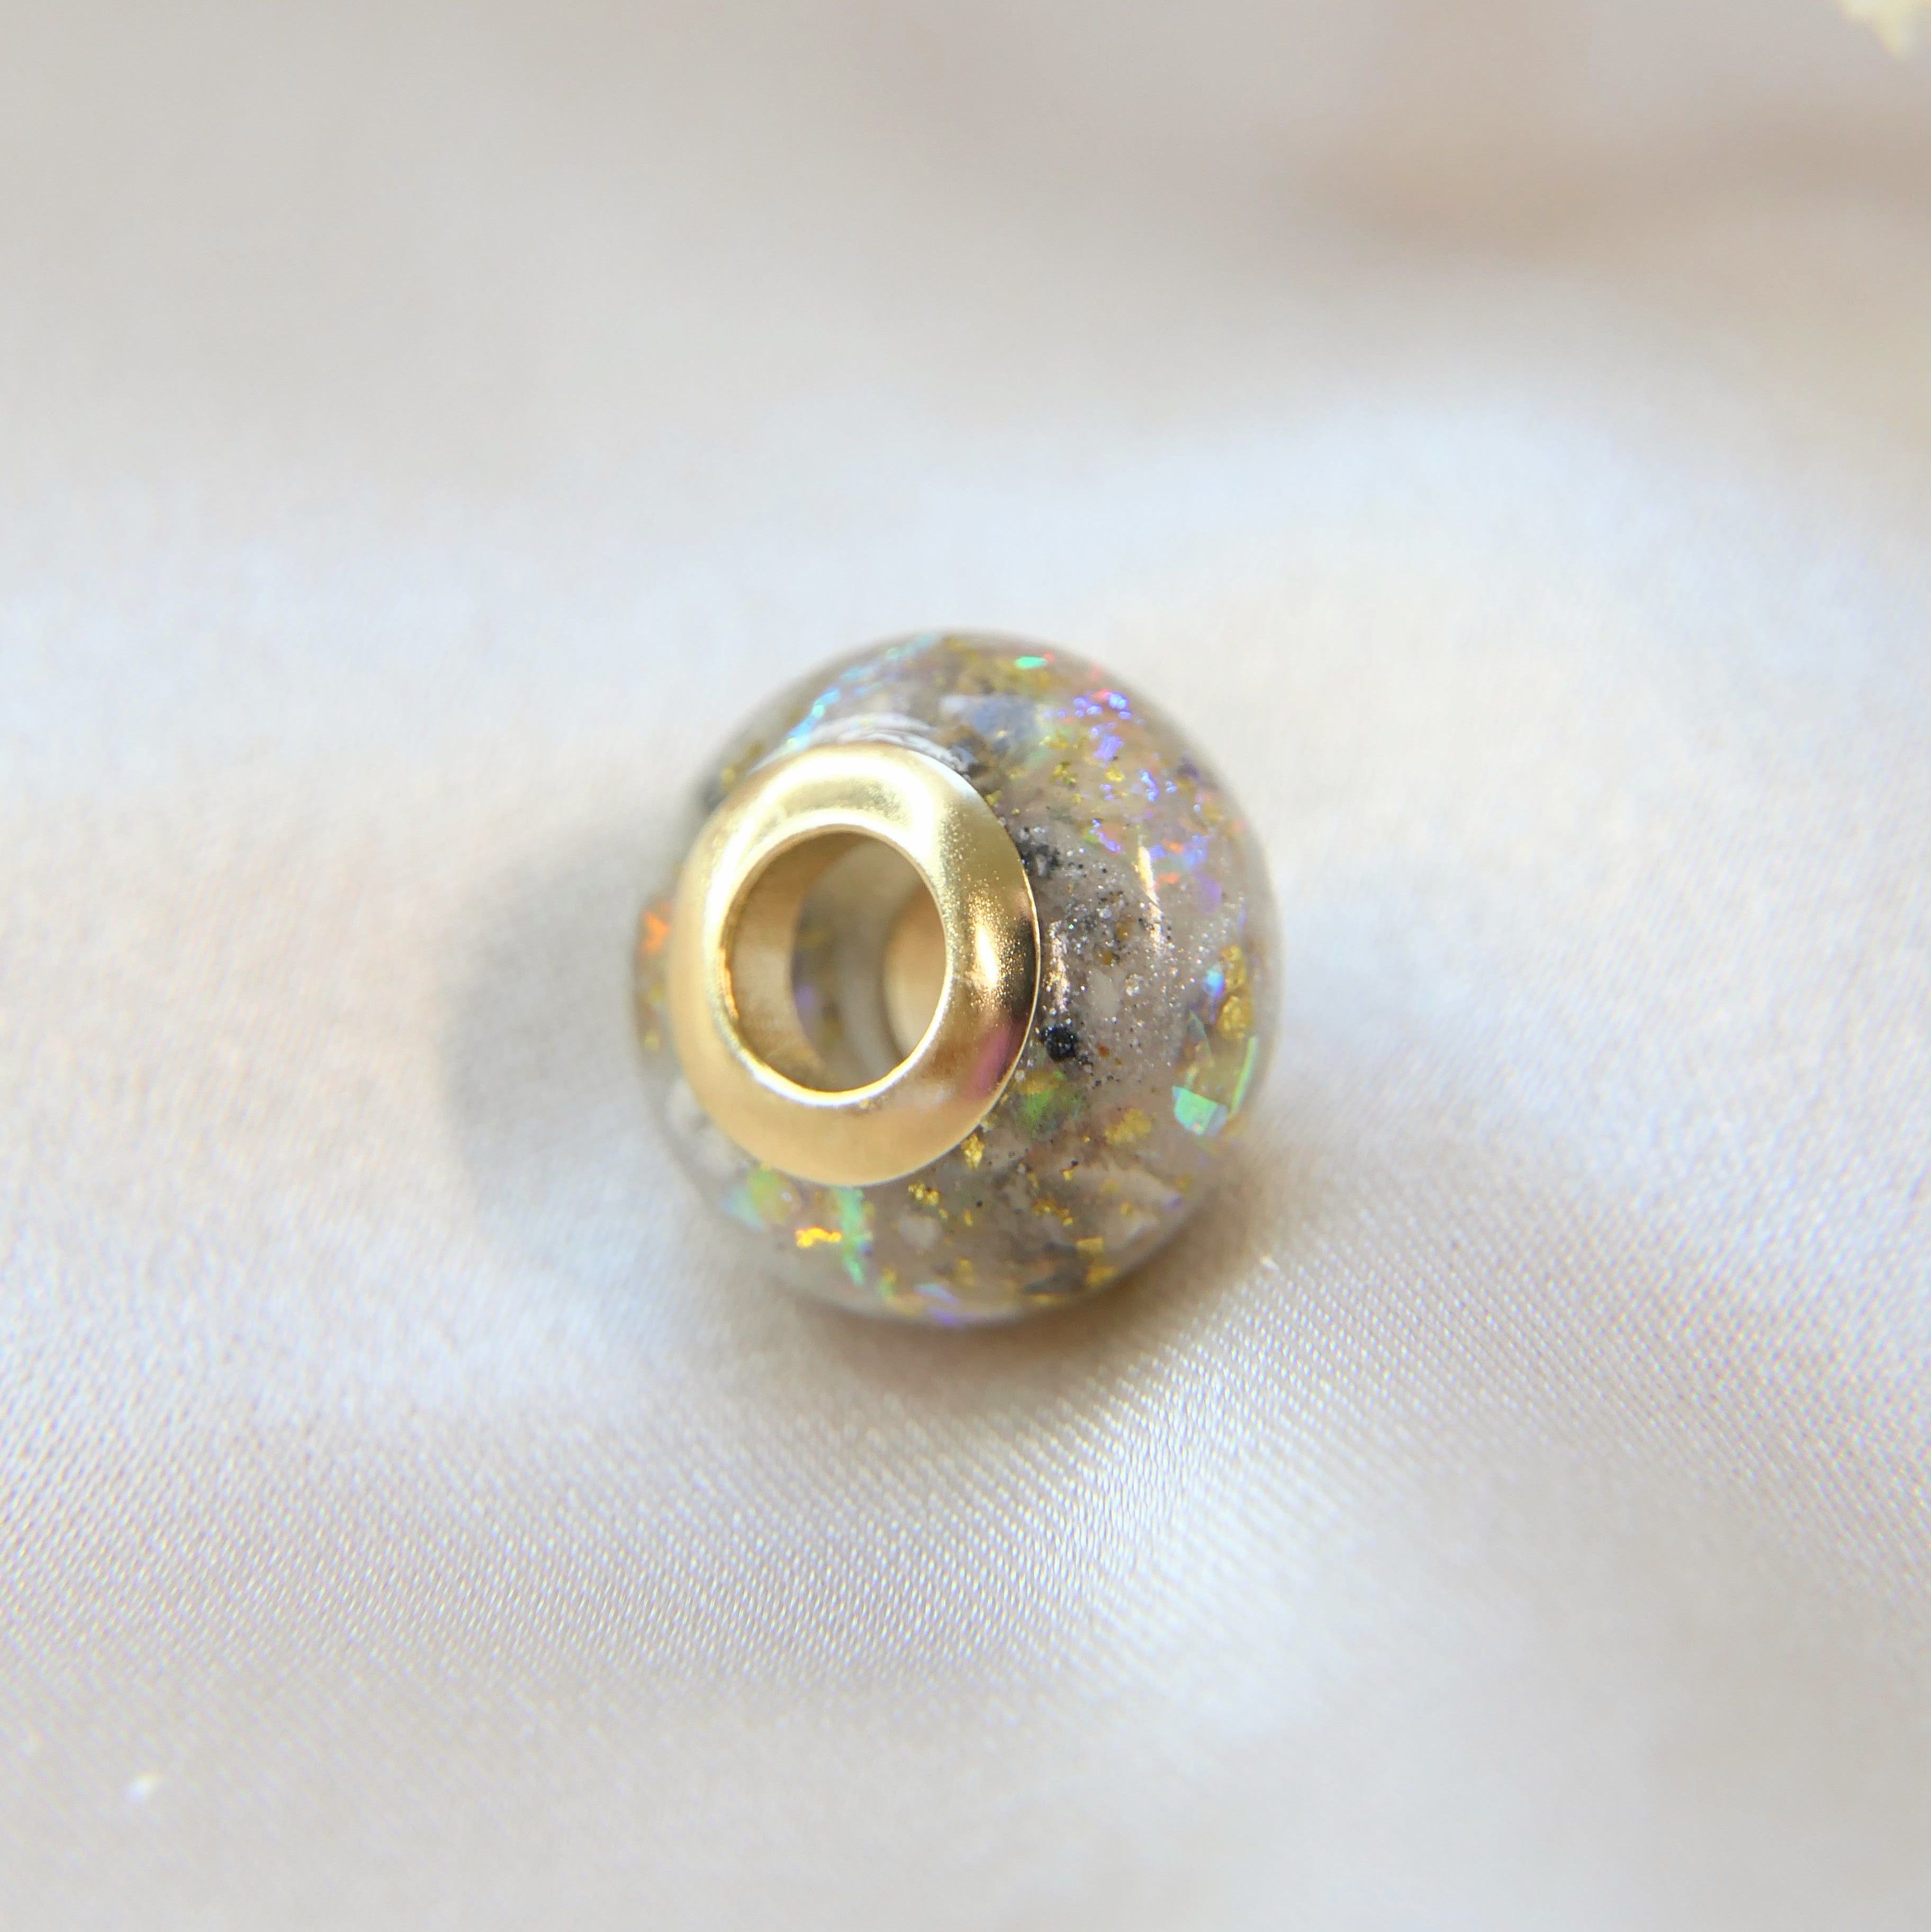 Ashes bead with opalescent flecks 